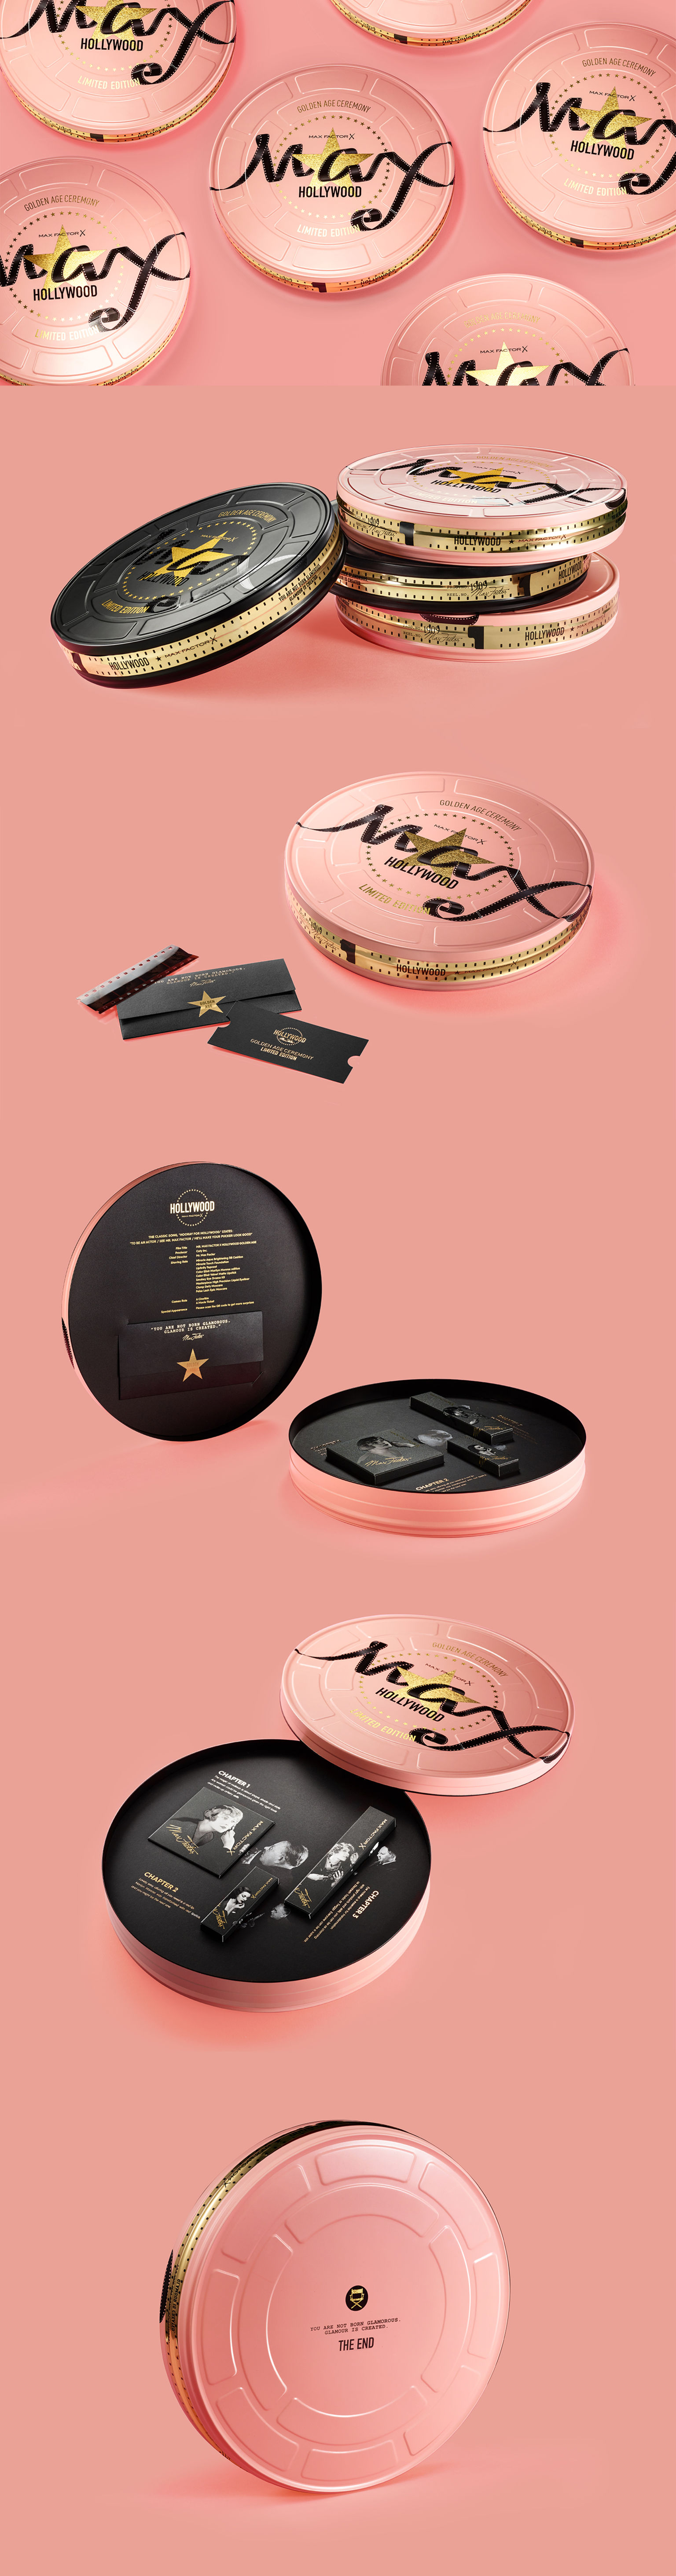 Maxfactor Hollywood Limited Edition